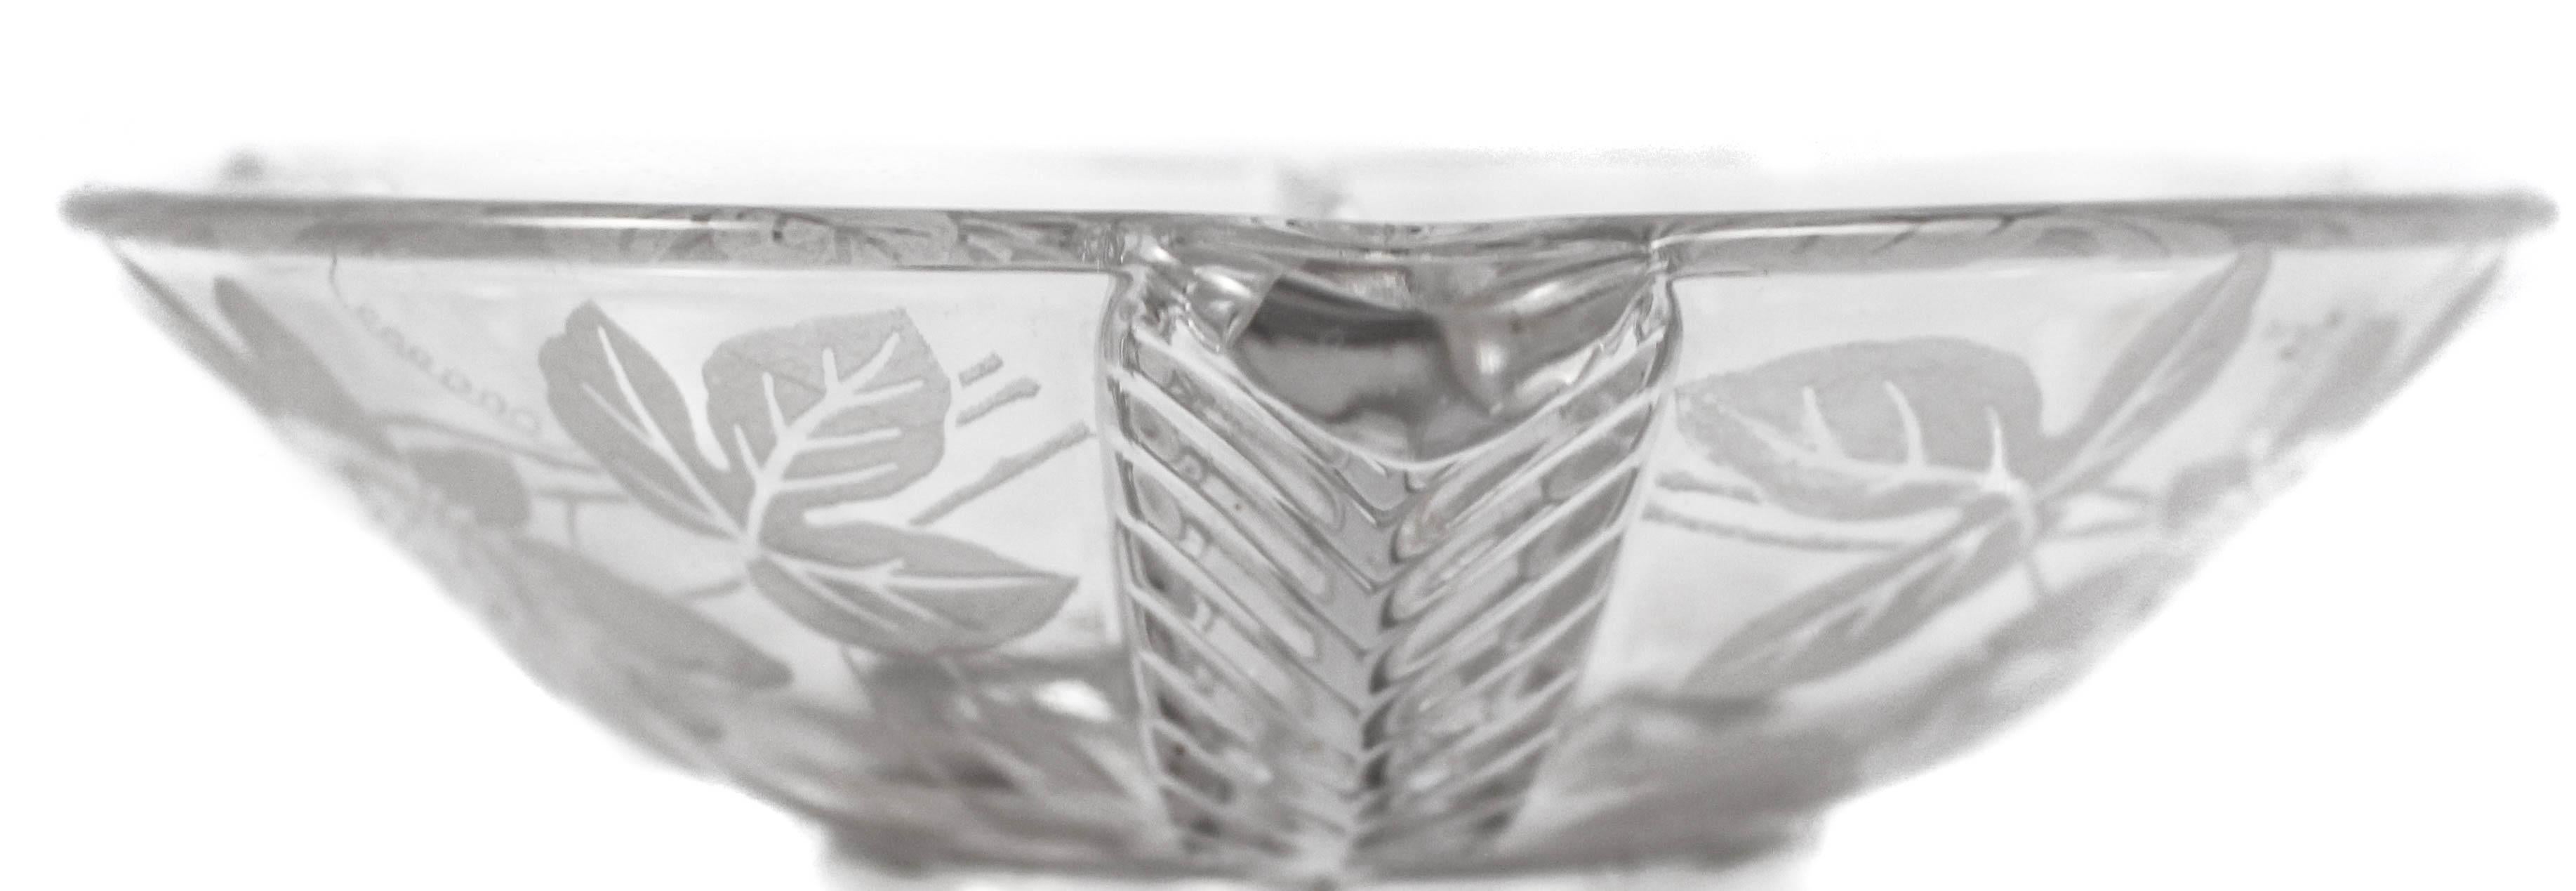 We are offering this crystal sectional with a sterling silver base by the Hawkes Glass Company.
Based in Corning, NY, T.G. Hawkes & Co. (c.1880-1959) was established by Thomas Gibbons Hawkes (1846-1913). Born in Ireland, Hawkes immigrated to